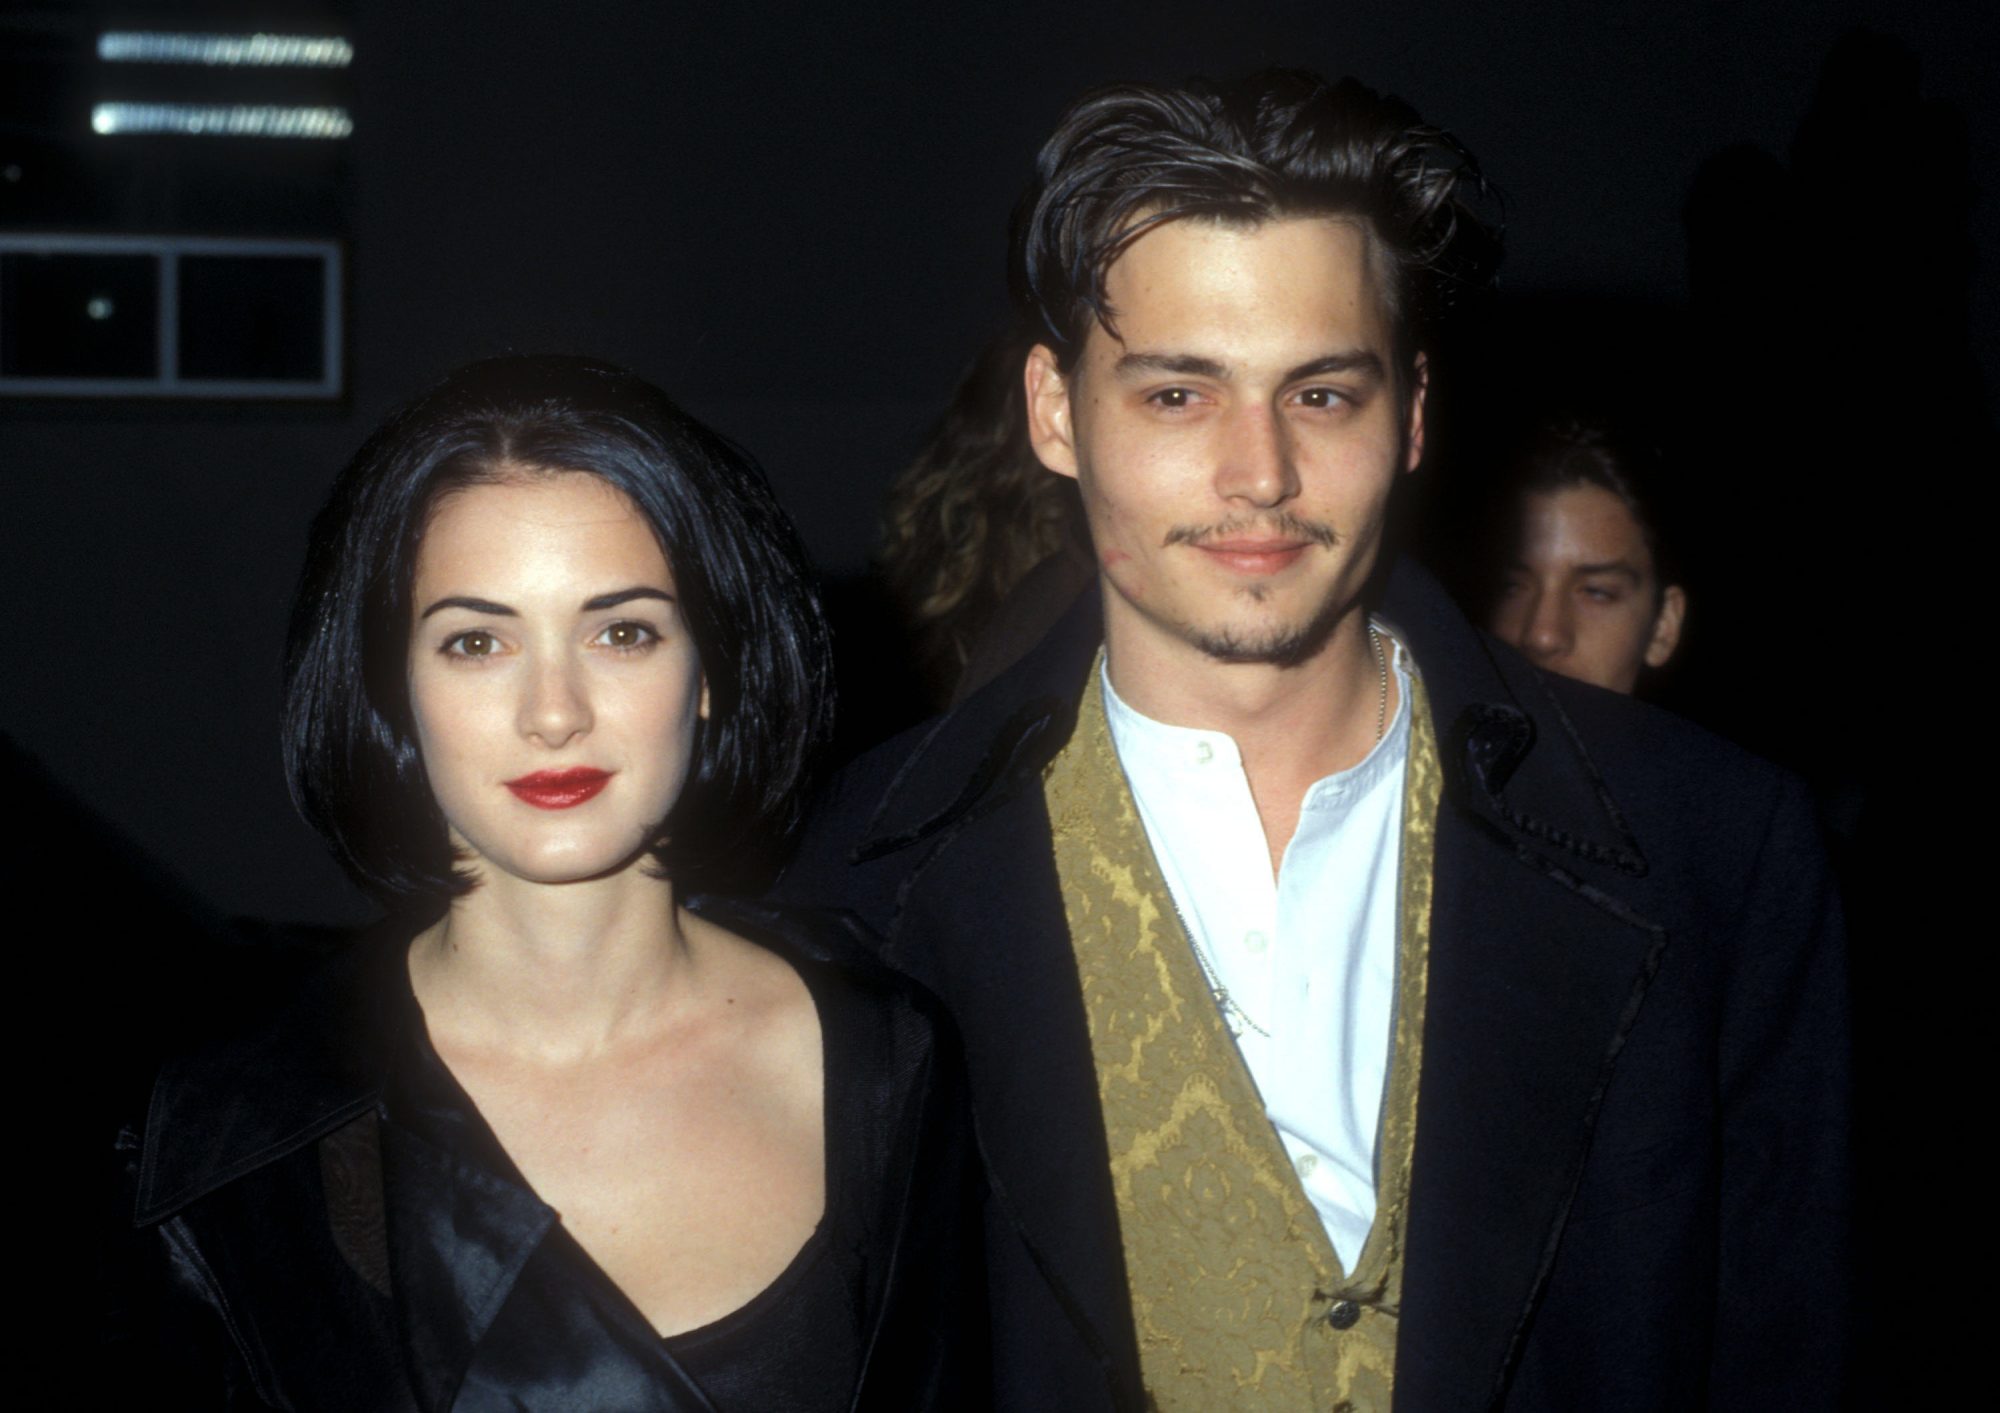 Ex-couple Johnny Depp and Winona Ryder - Winona Ryder Says Film Directors Once Found Her Unattractive